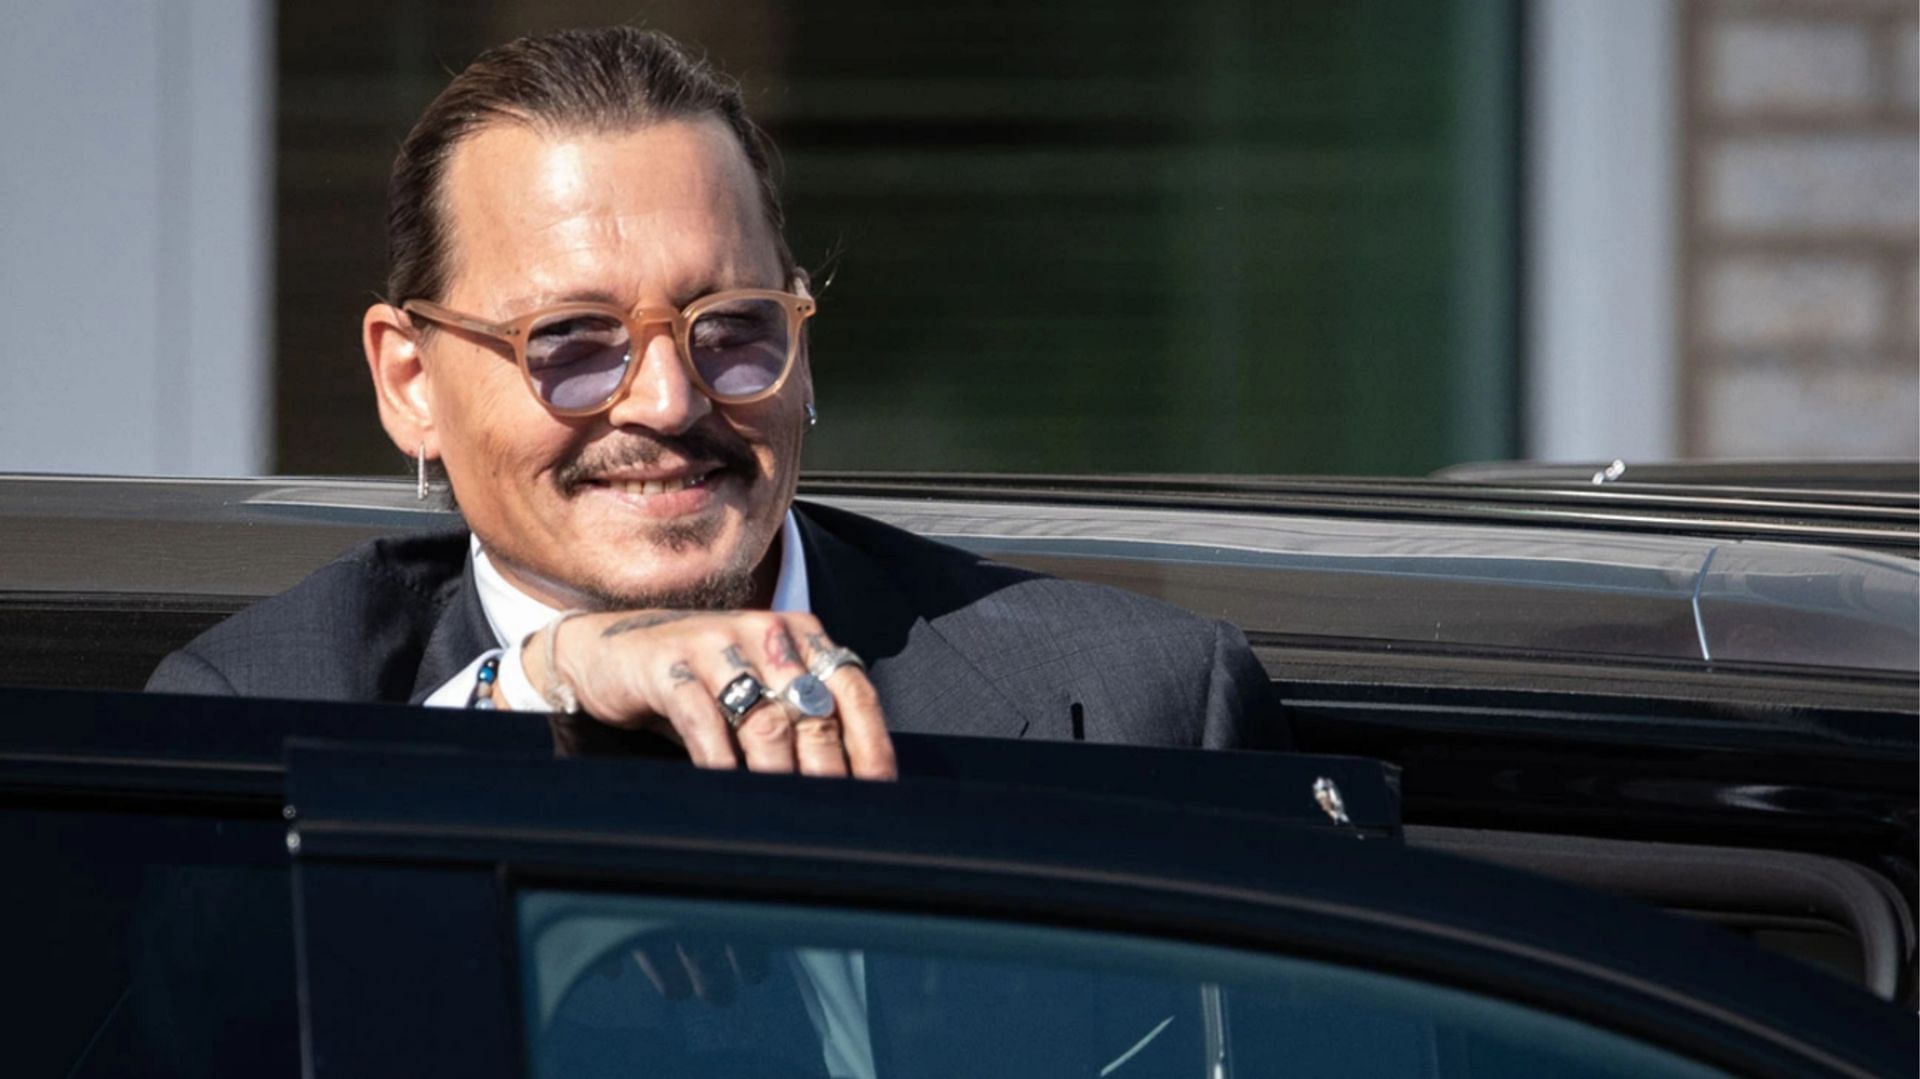 Johnny Depp and his team of attorneys are staying at Fairfax&#039;s Ritz-Carlton hotel. (Image via Getty Images/Consolidated News Pictures)